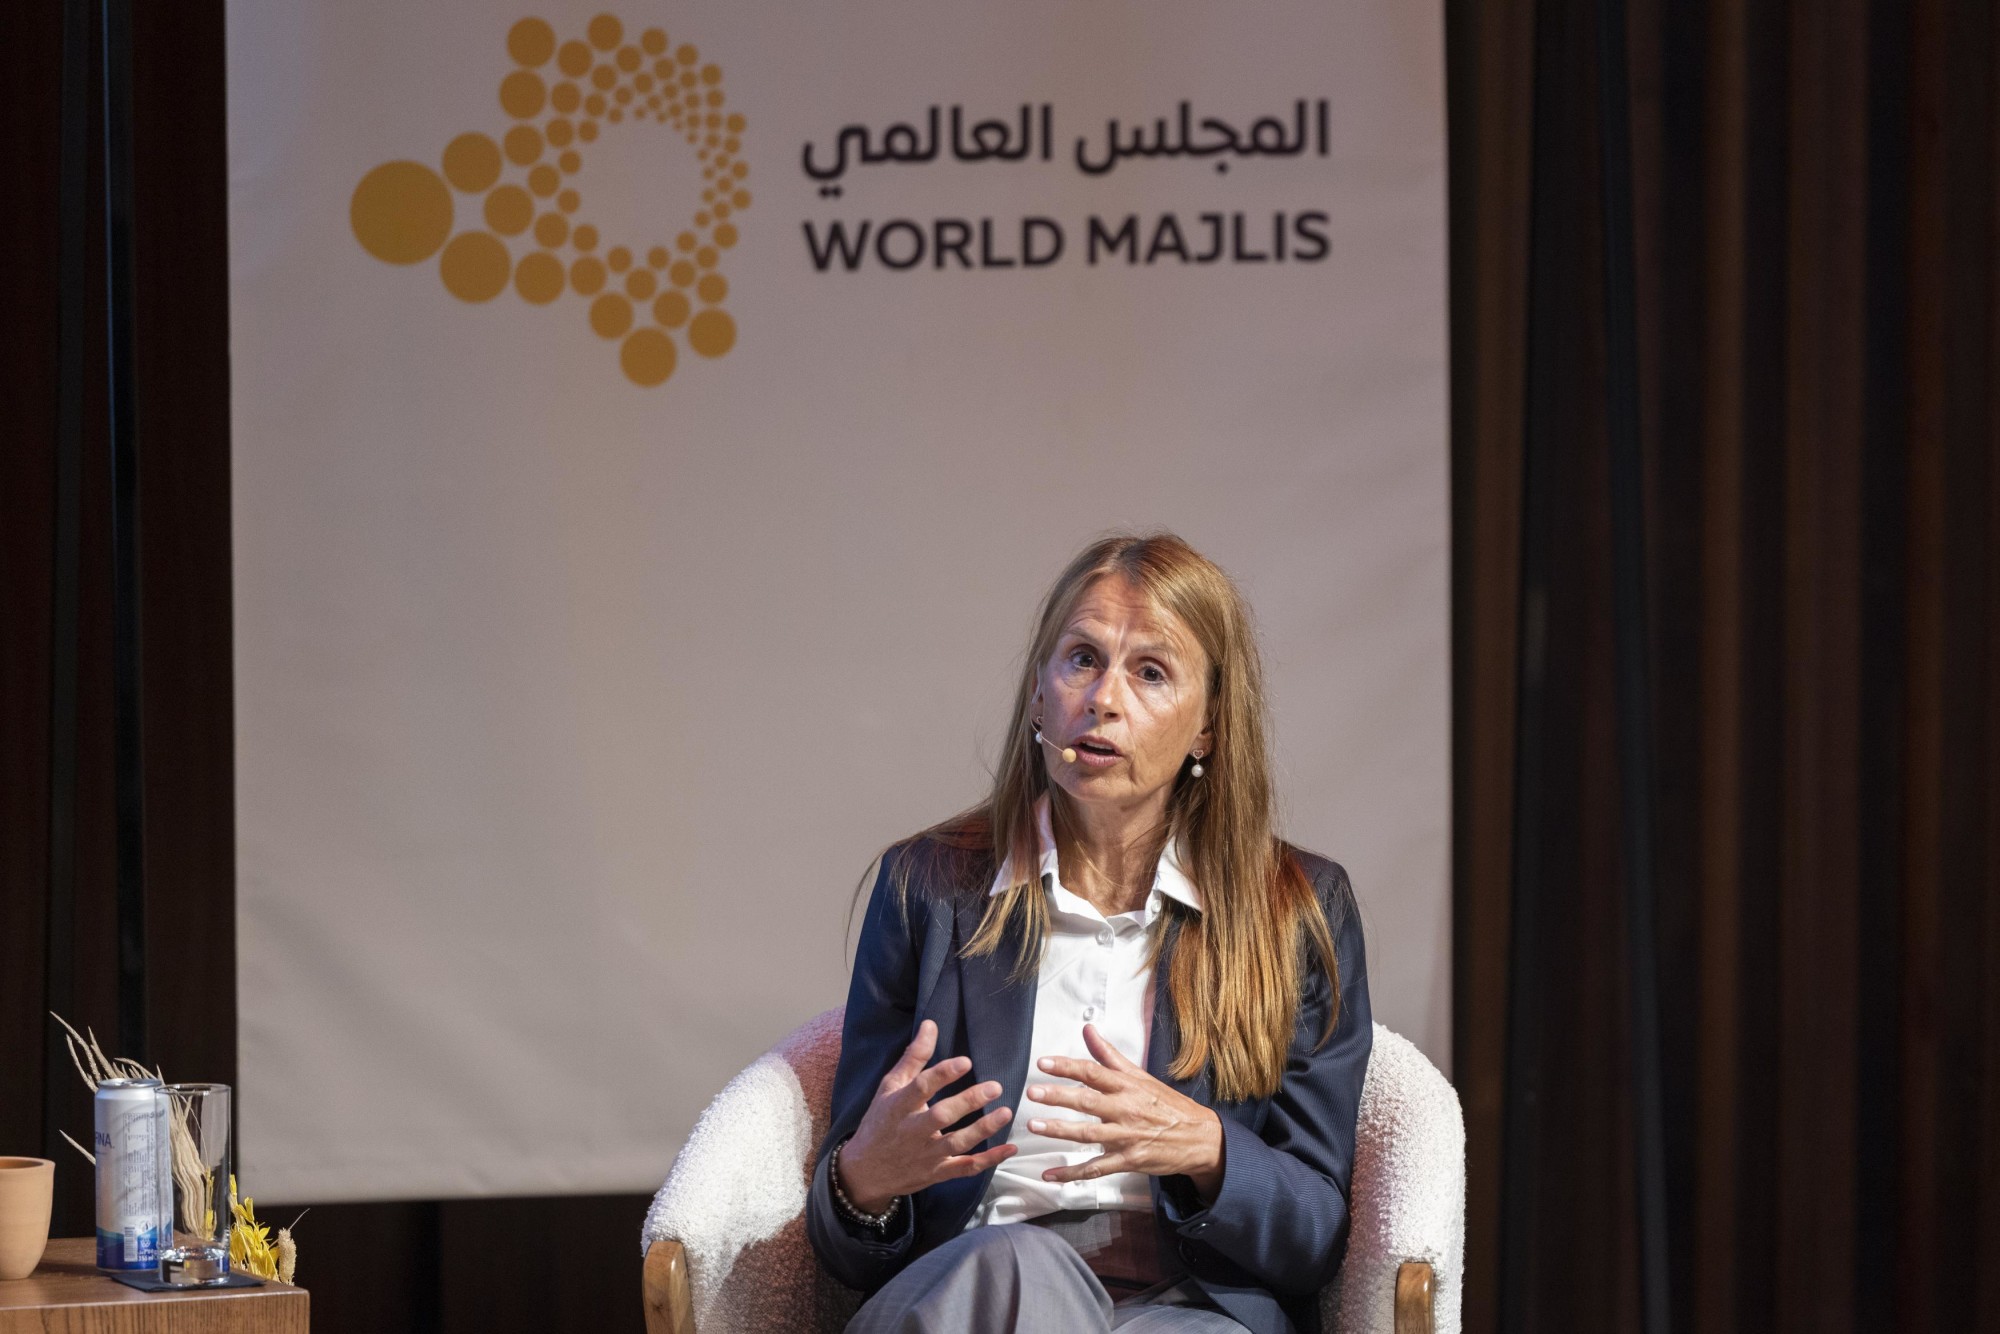 Kathleen Swalling, Maritime Law and Strategy Advisor, Managing Director, Nature Based Solutions LLC, UAE speaks during the Water Week World Majlis Deep Blue The (Other) Final Frontier Undiscovered Wonders of the Ocean at Terra m66011